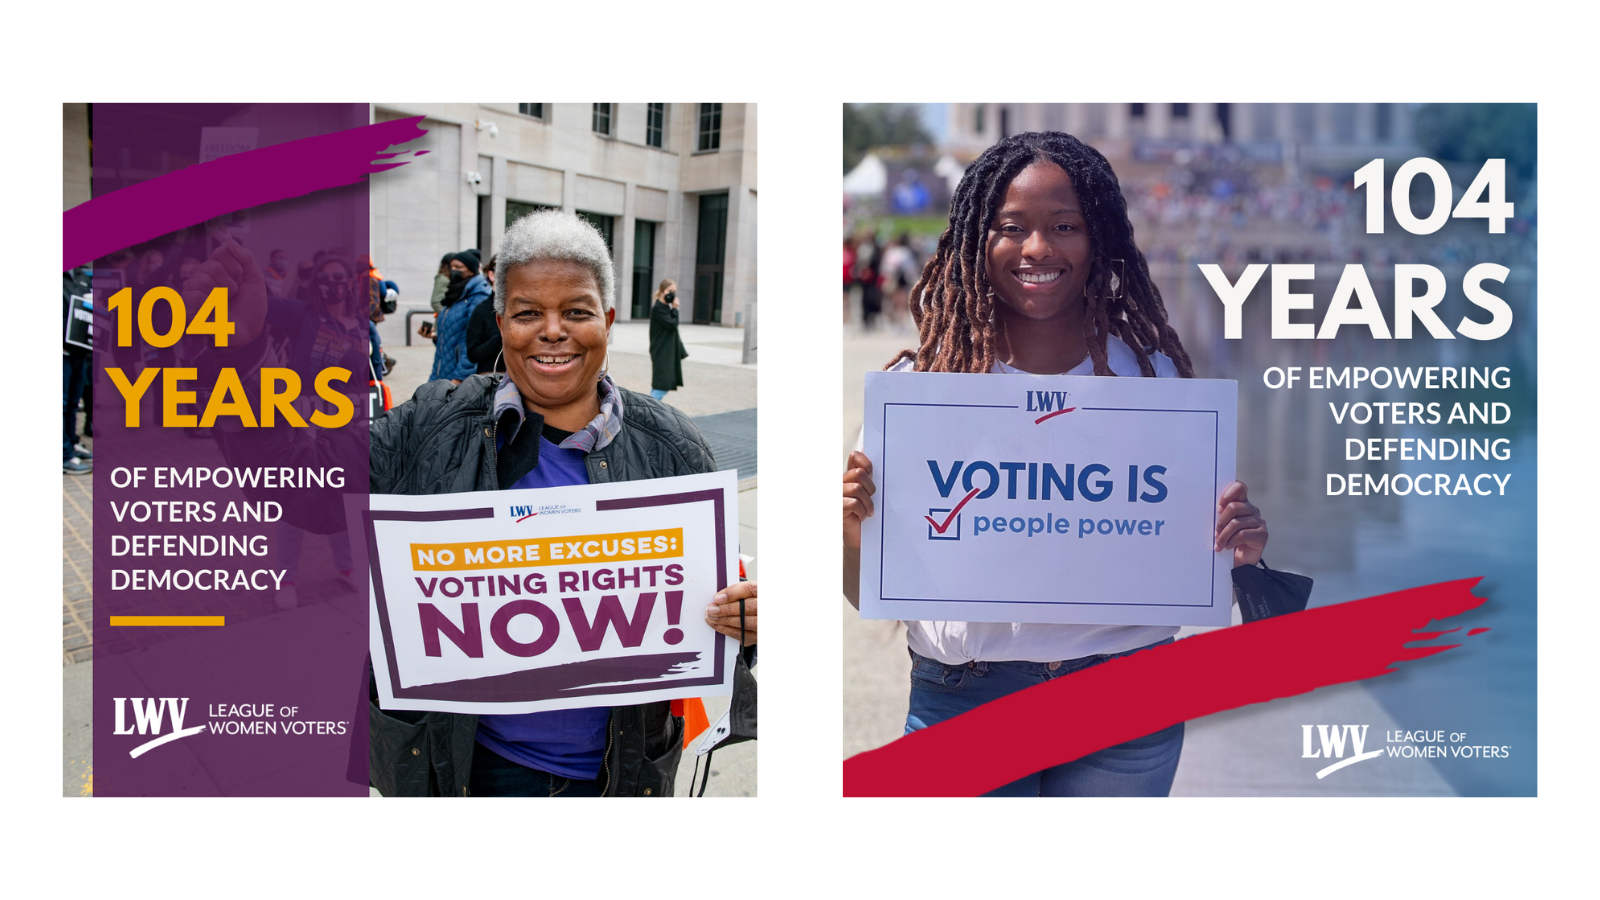 There are two square graphics. The one on the left features a picture of LWVUS' 20th president, Dr. Deborah Turner. She is holding a sign that says "NO MORE EXCUSES: VOTING RIGHTS NOW." The graphic has a purple stripe on the left side with a magenta LWV swoosh at the top. Under the swoosh is text that says "104 YEARS of empowering voters and defending democracy." The graphic on the right features a young woman holding a LWV rally sign: "VOTING IS people power." There is a red LWV swoosh on the bottom of the graphic. To the right of the woman is the text "104  years of empowering voters and defending democracy."